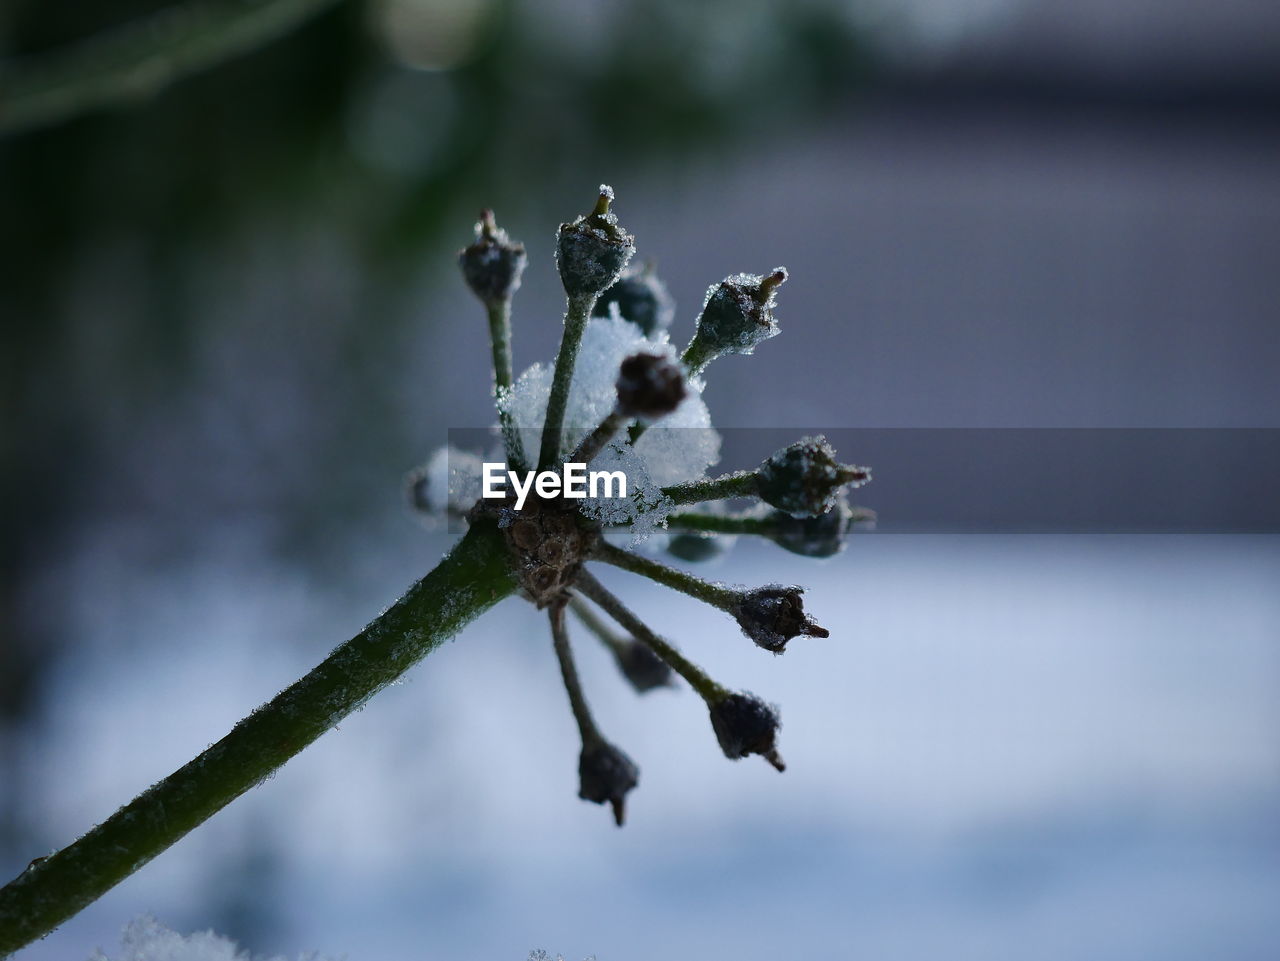 nature, macro photography, branch, close-up, winter, flower, plant, leaf, blossom, frost, focus on foreground, twig, no people, tree, green, beauty in nature, snow, spring, outdoors, plant stem, day, flowering plant, water, sky, fragility, freezing